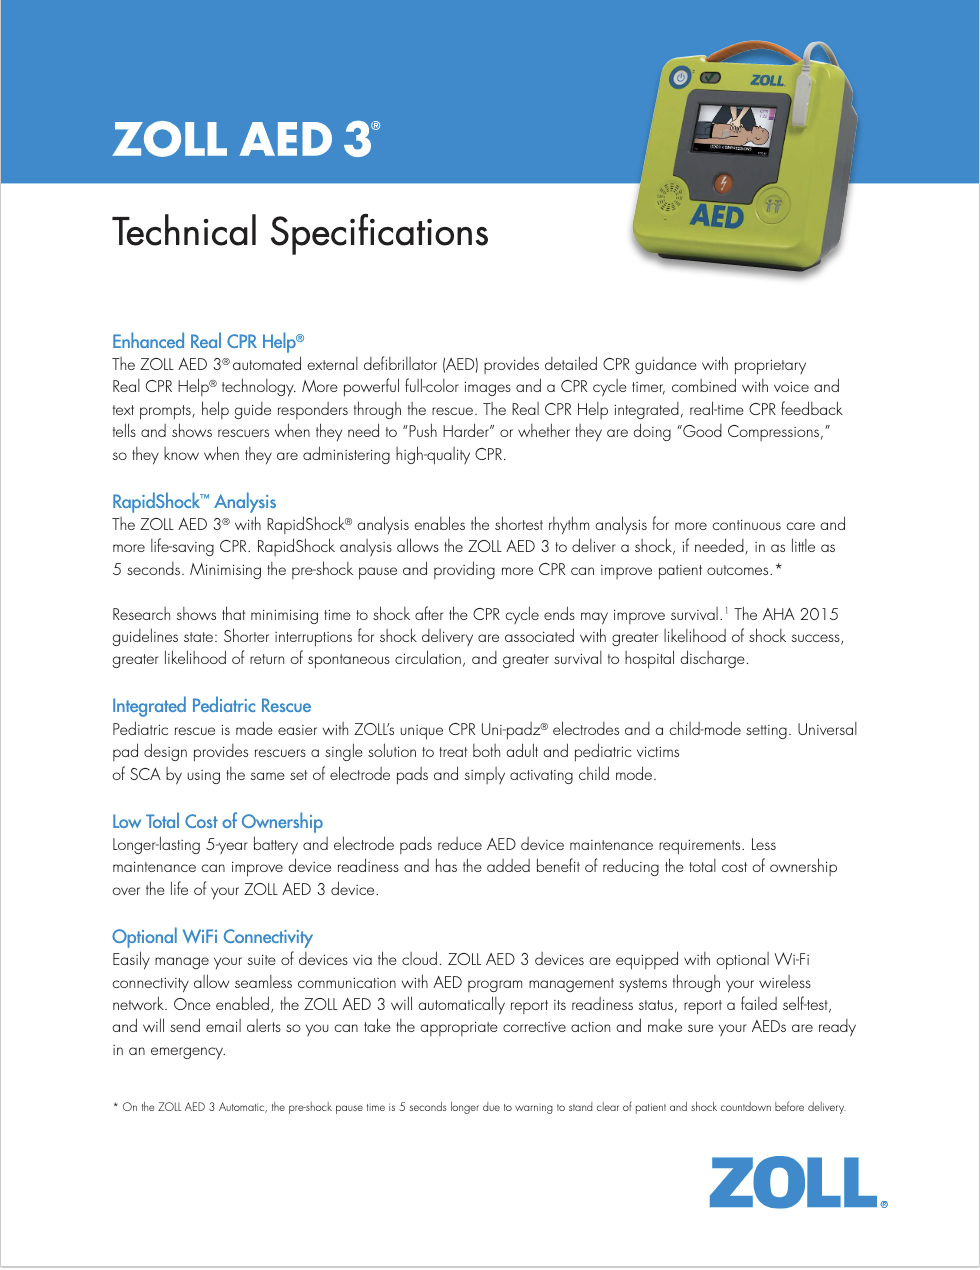 ZOLL AED 3 spec sheet